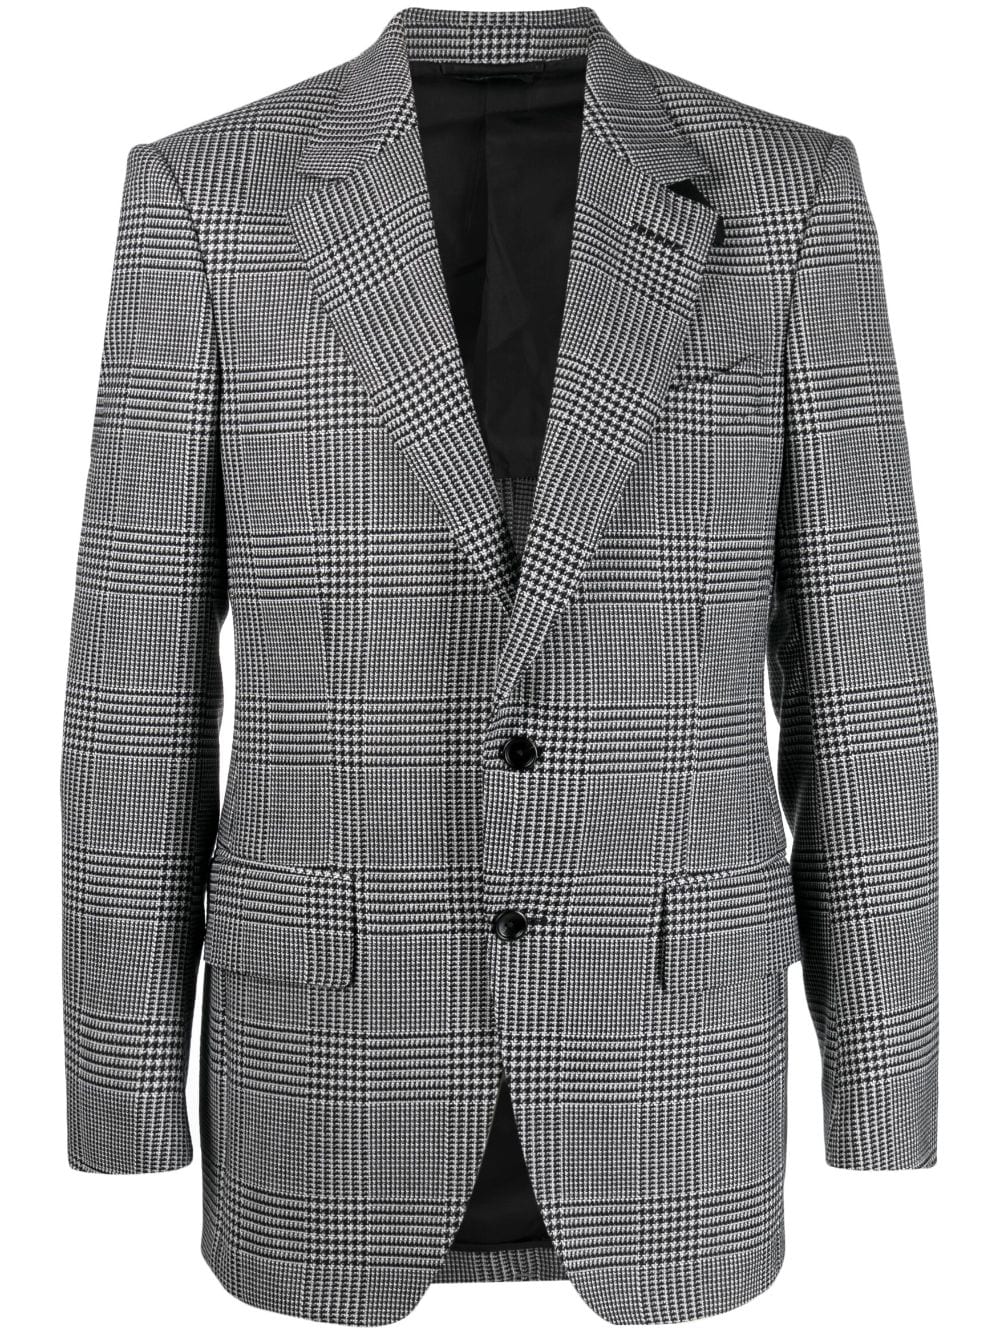 Shop Tom Ford Single Breasted Jacket